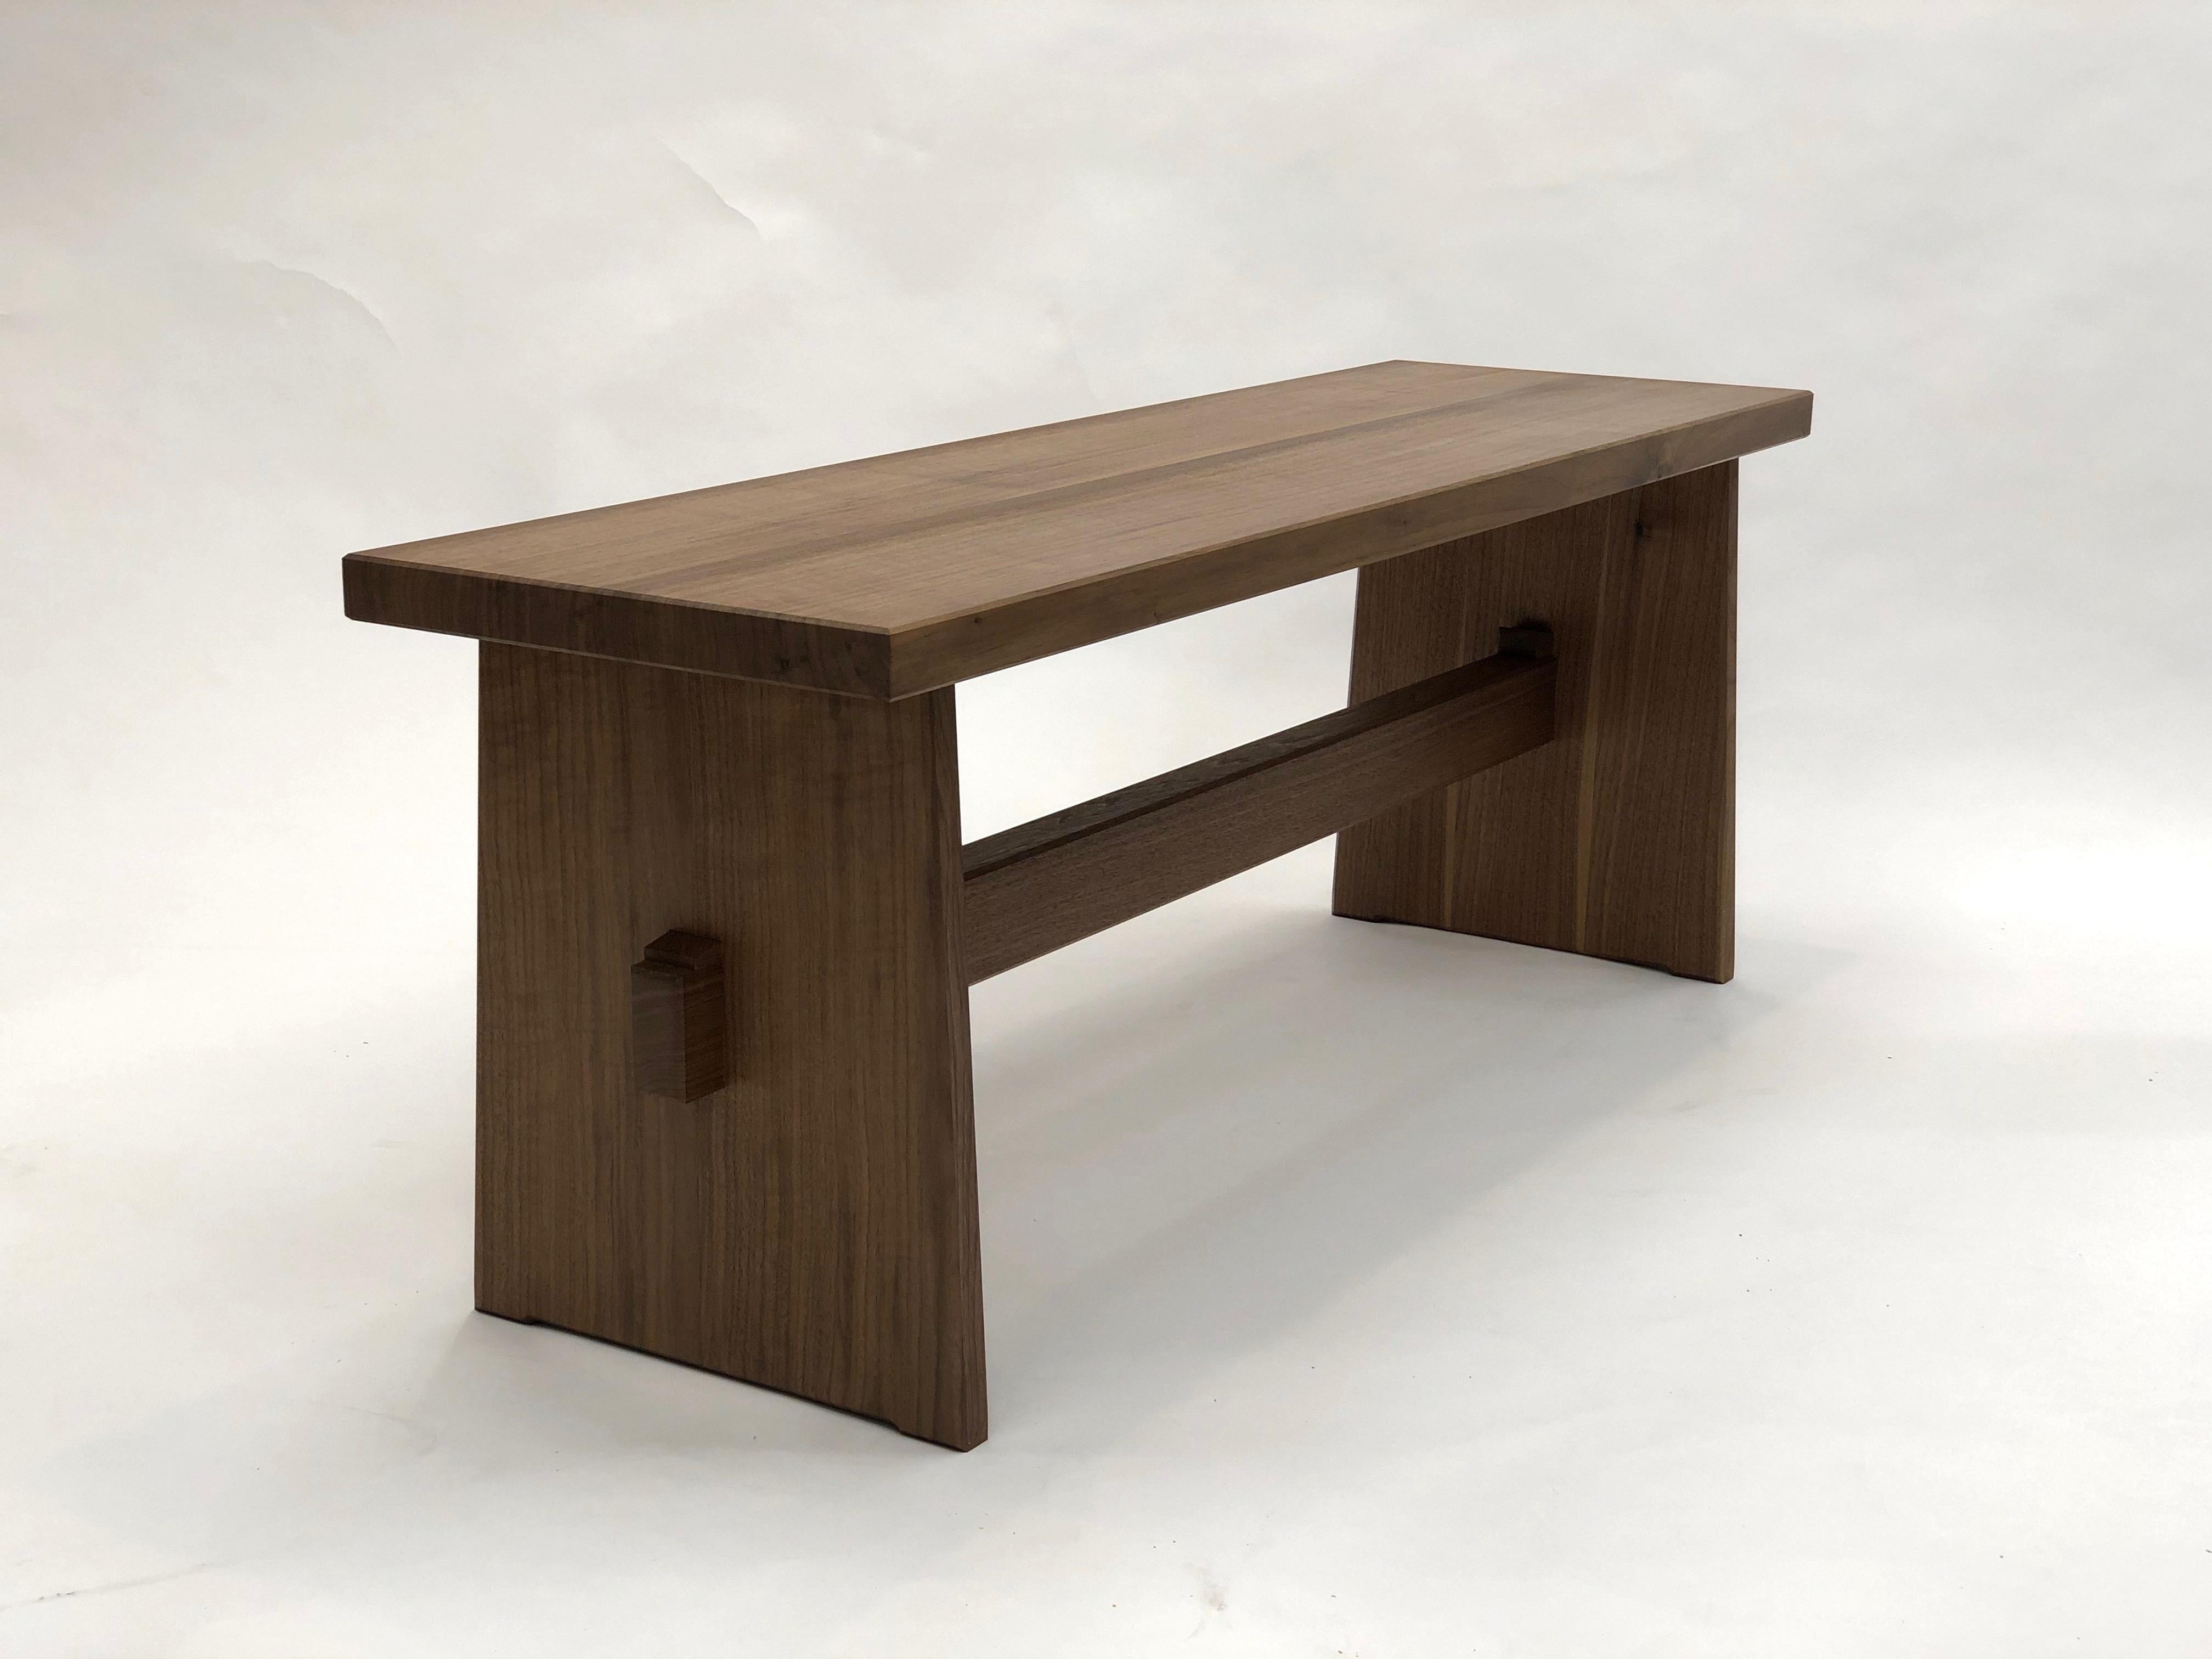 Trestle base bench in quarter sawn walnut created utilizing the techniques of Japanese temple carpentry. This bench is created using interlocking wooden joinery and without metal fasteners. It is available in a variety of sizes.

Measures: Shown